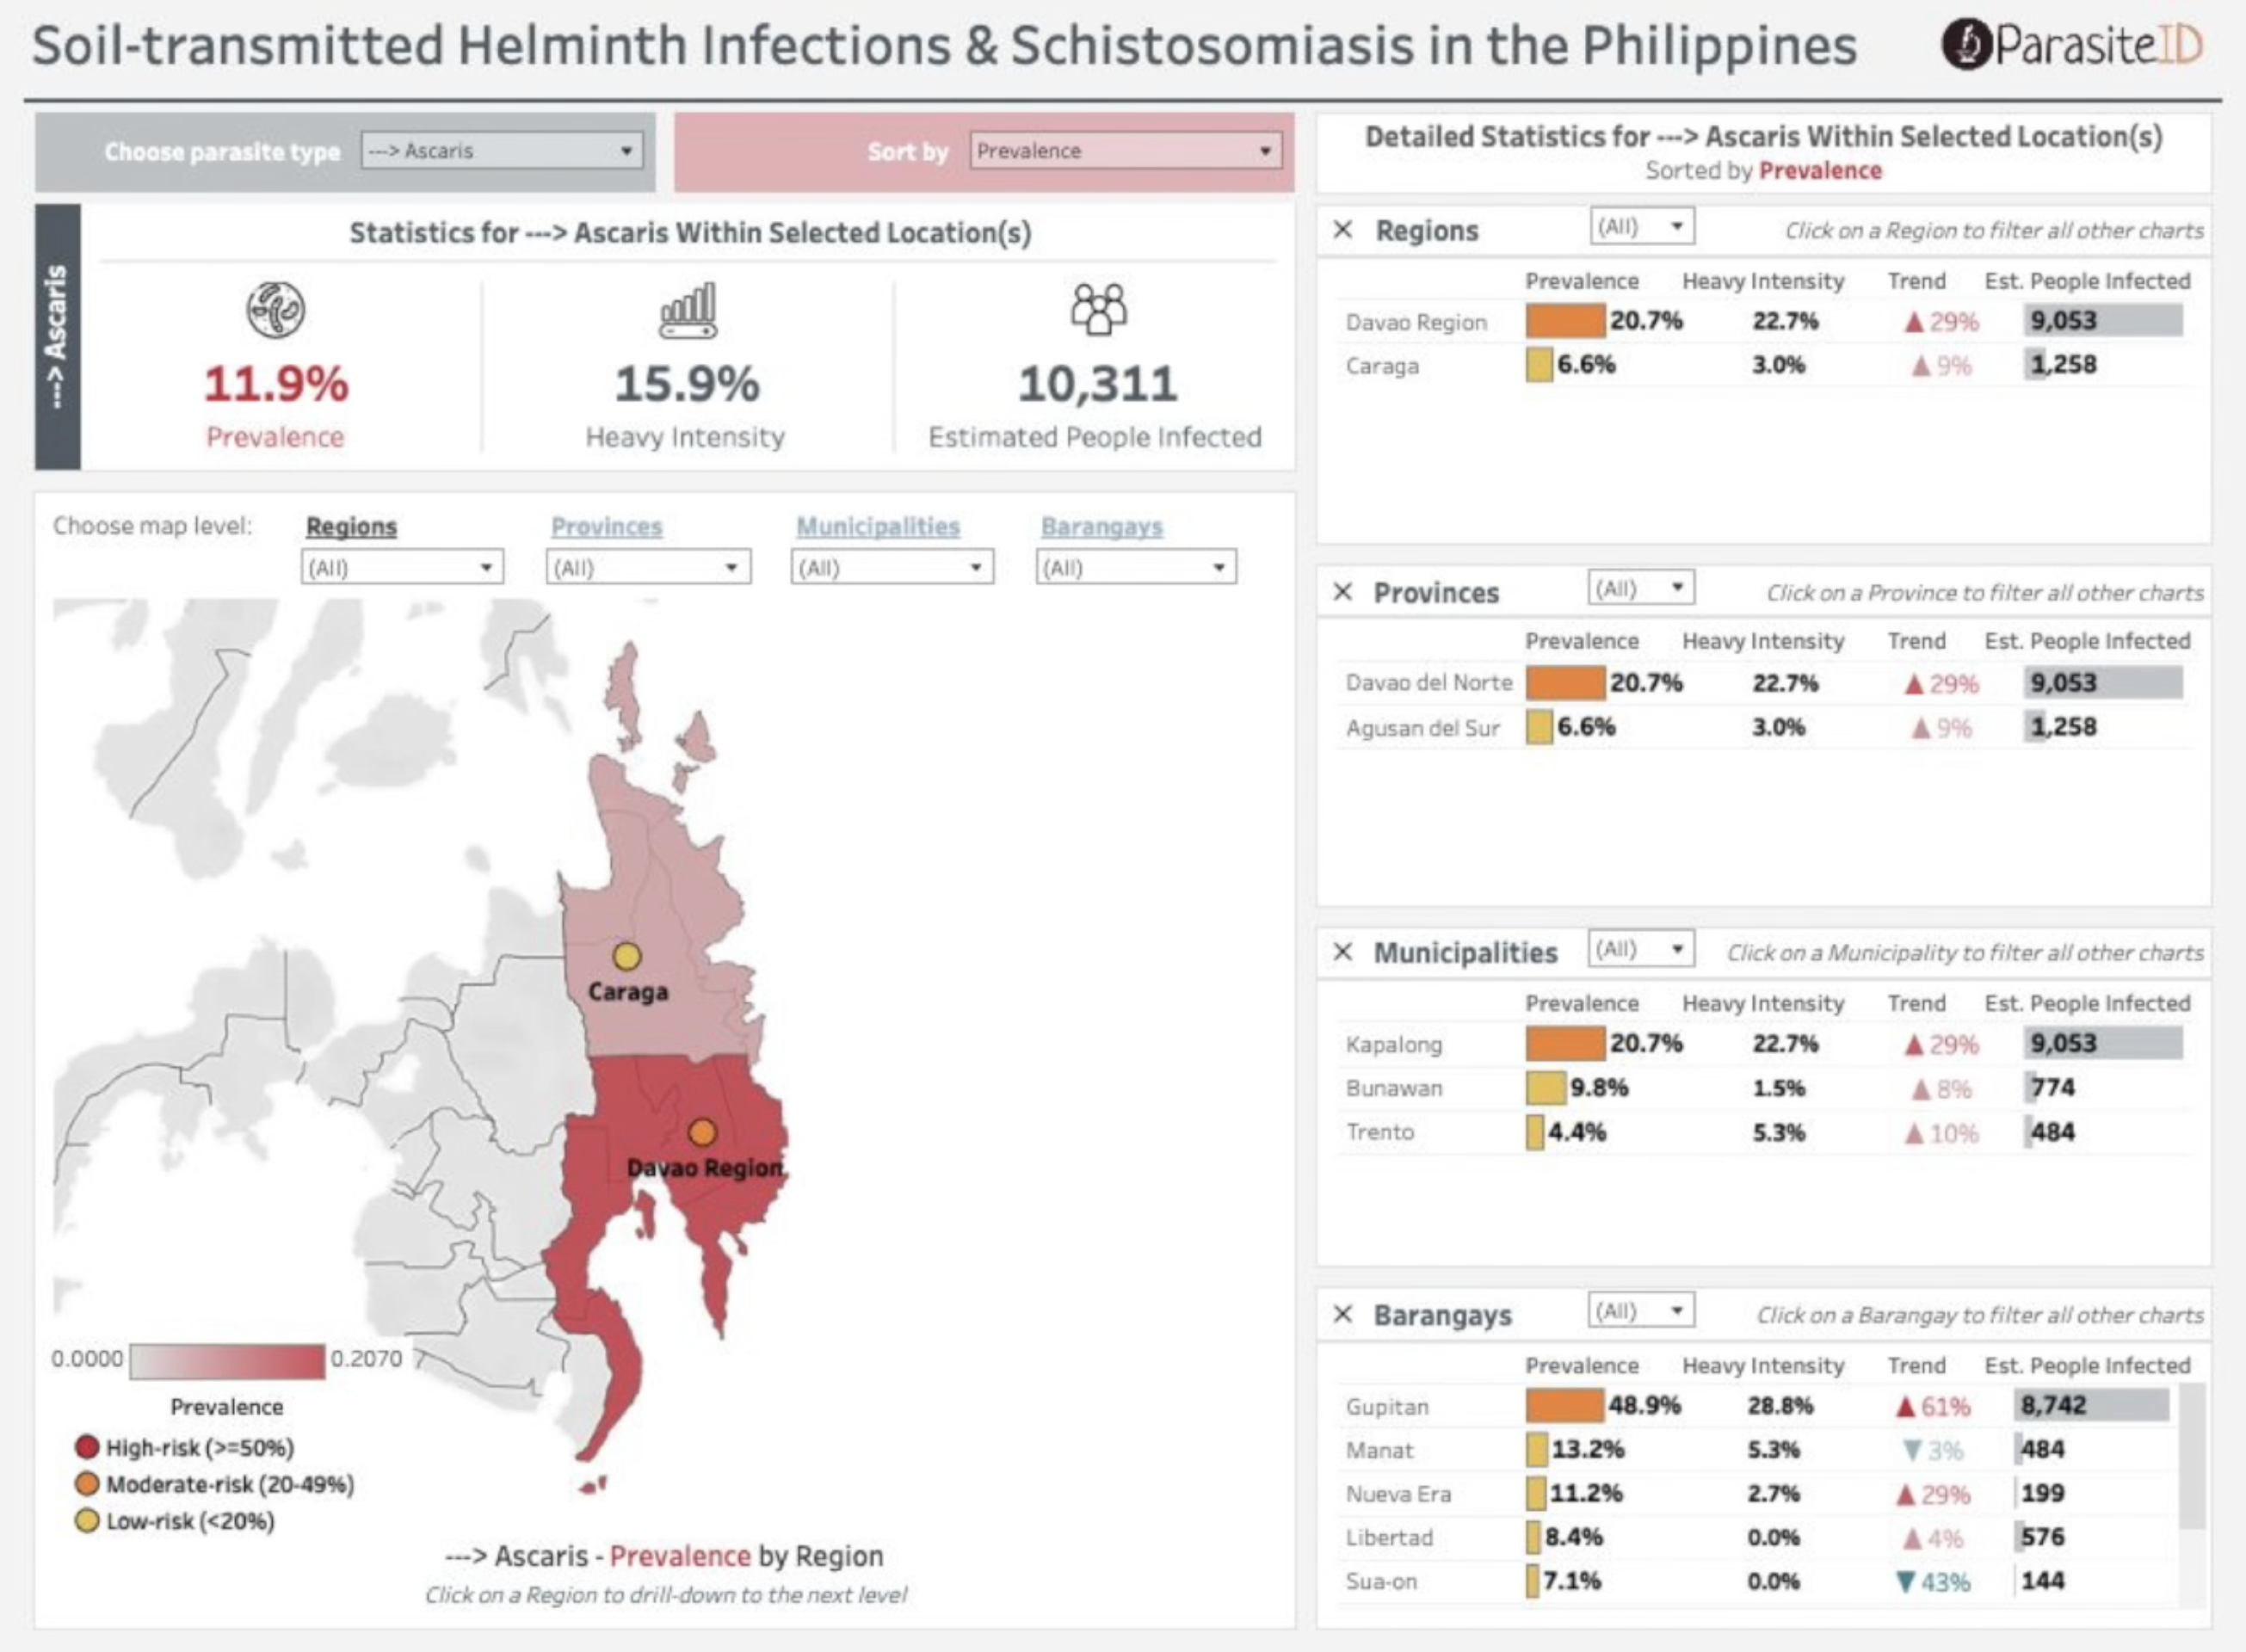 Image of Parasite ID data dashboard showing visualizations of STH and SCH infections in the Philippines